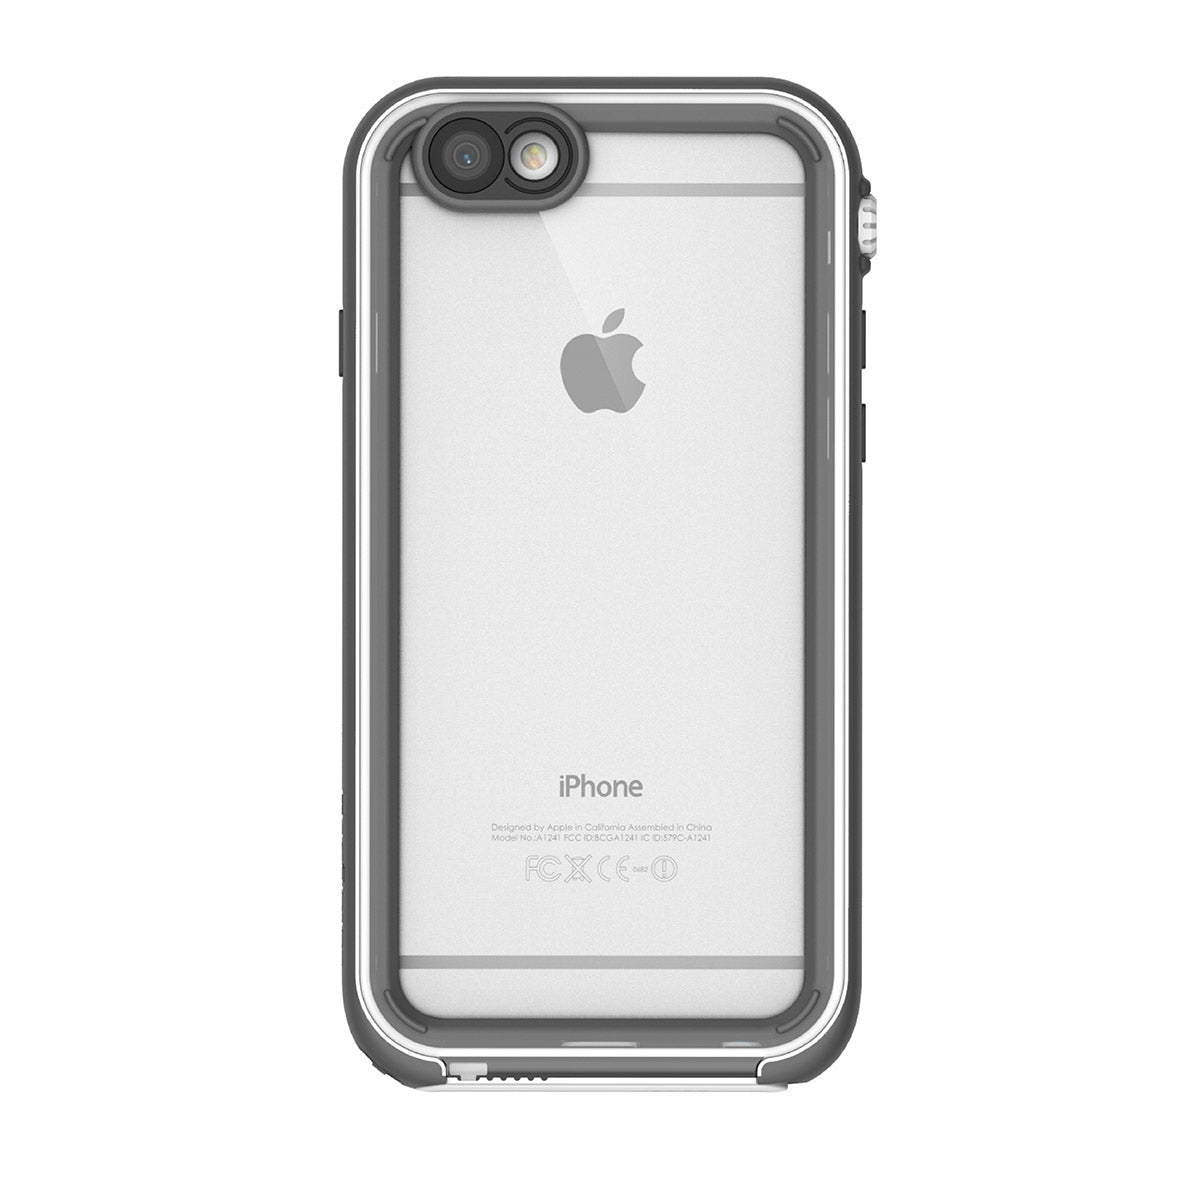 Catalyst iphone 6s waterproof case showing the back view of the case in white&mist gray colorway